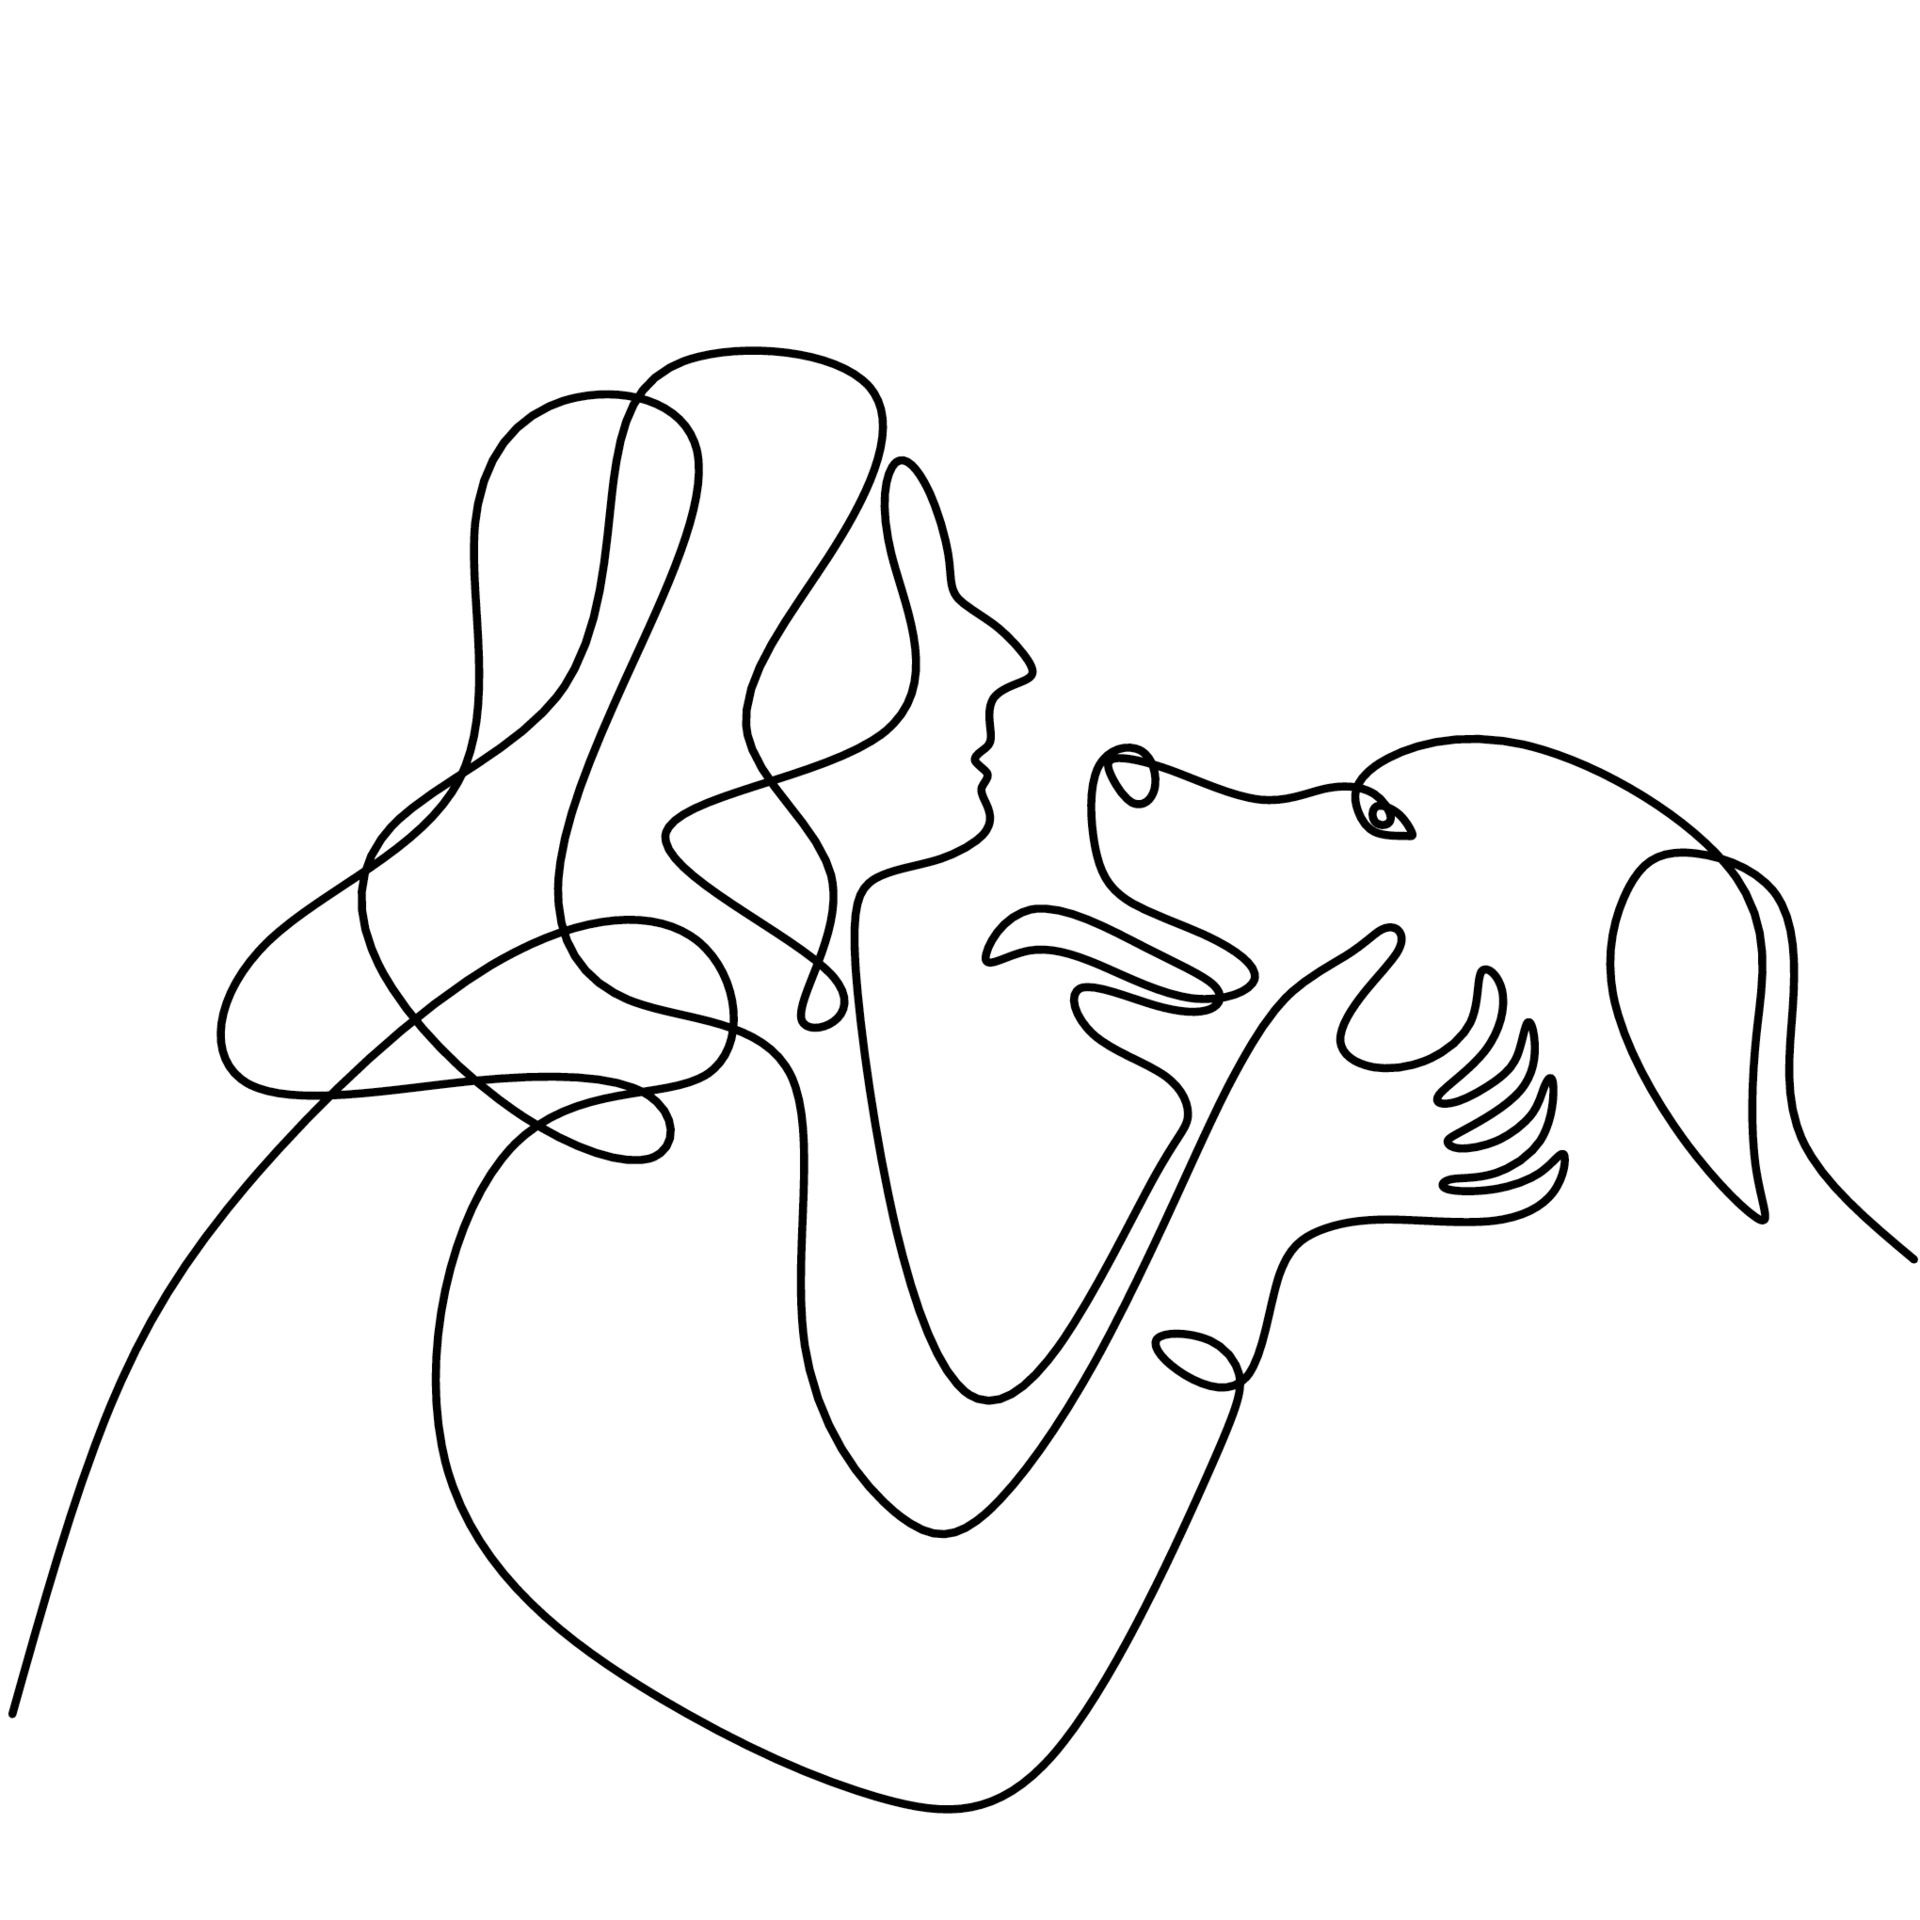 Continuous line drawing of woman happy pet lover with dog. Young female  enjoy playing with her cute dog linear sketch isolated on white background.  Friendship about human and pet animal concept 2215014